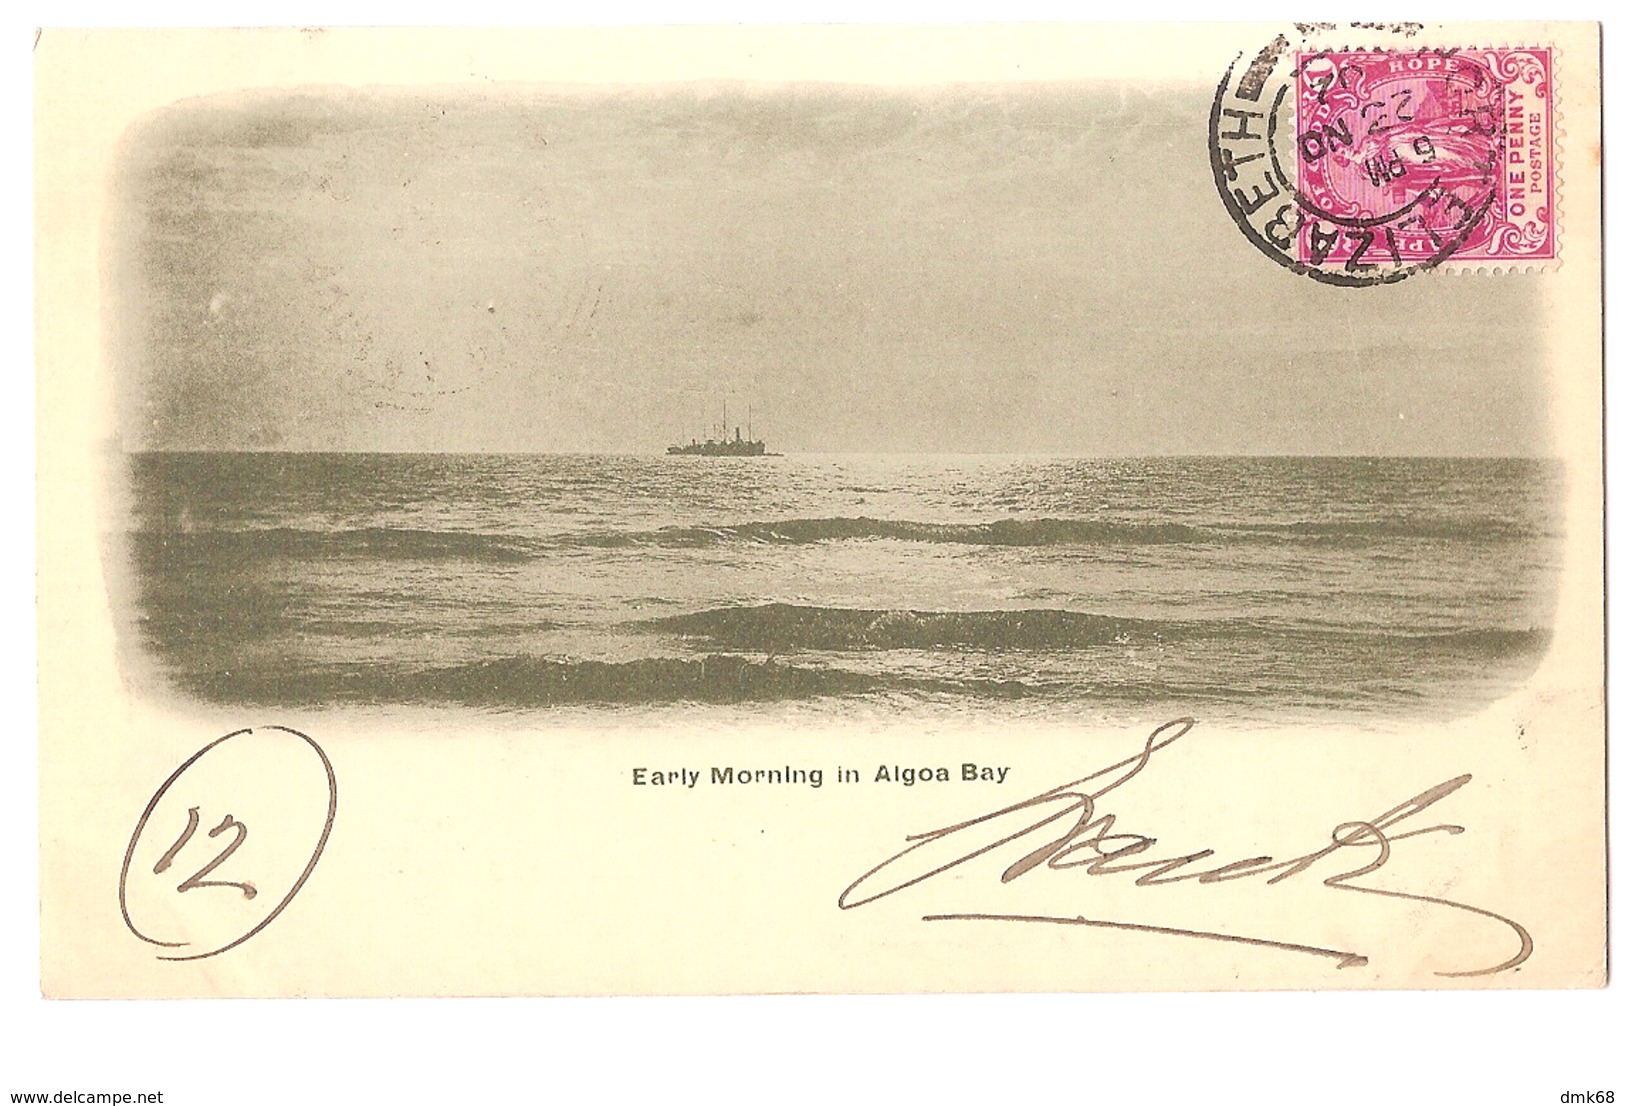 SOUTH AFRICA - EARLY MORNING IN ANGOA BAY - STAMP - MAILED TO ITALY 1902 - ( 2781) - Afrique Du Sud